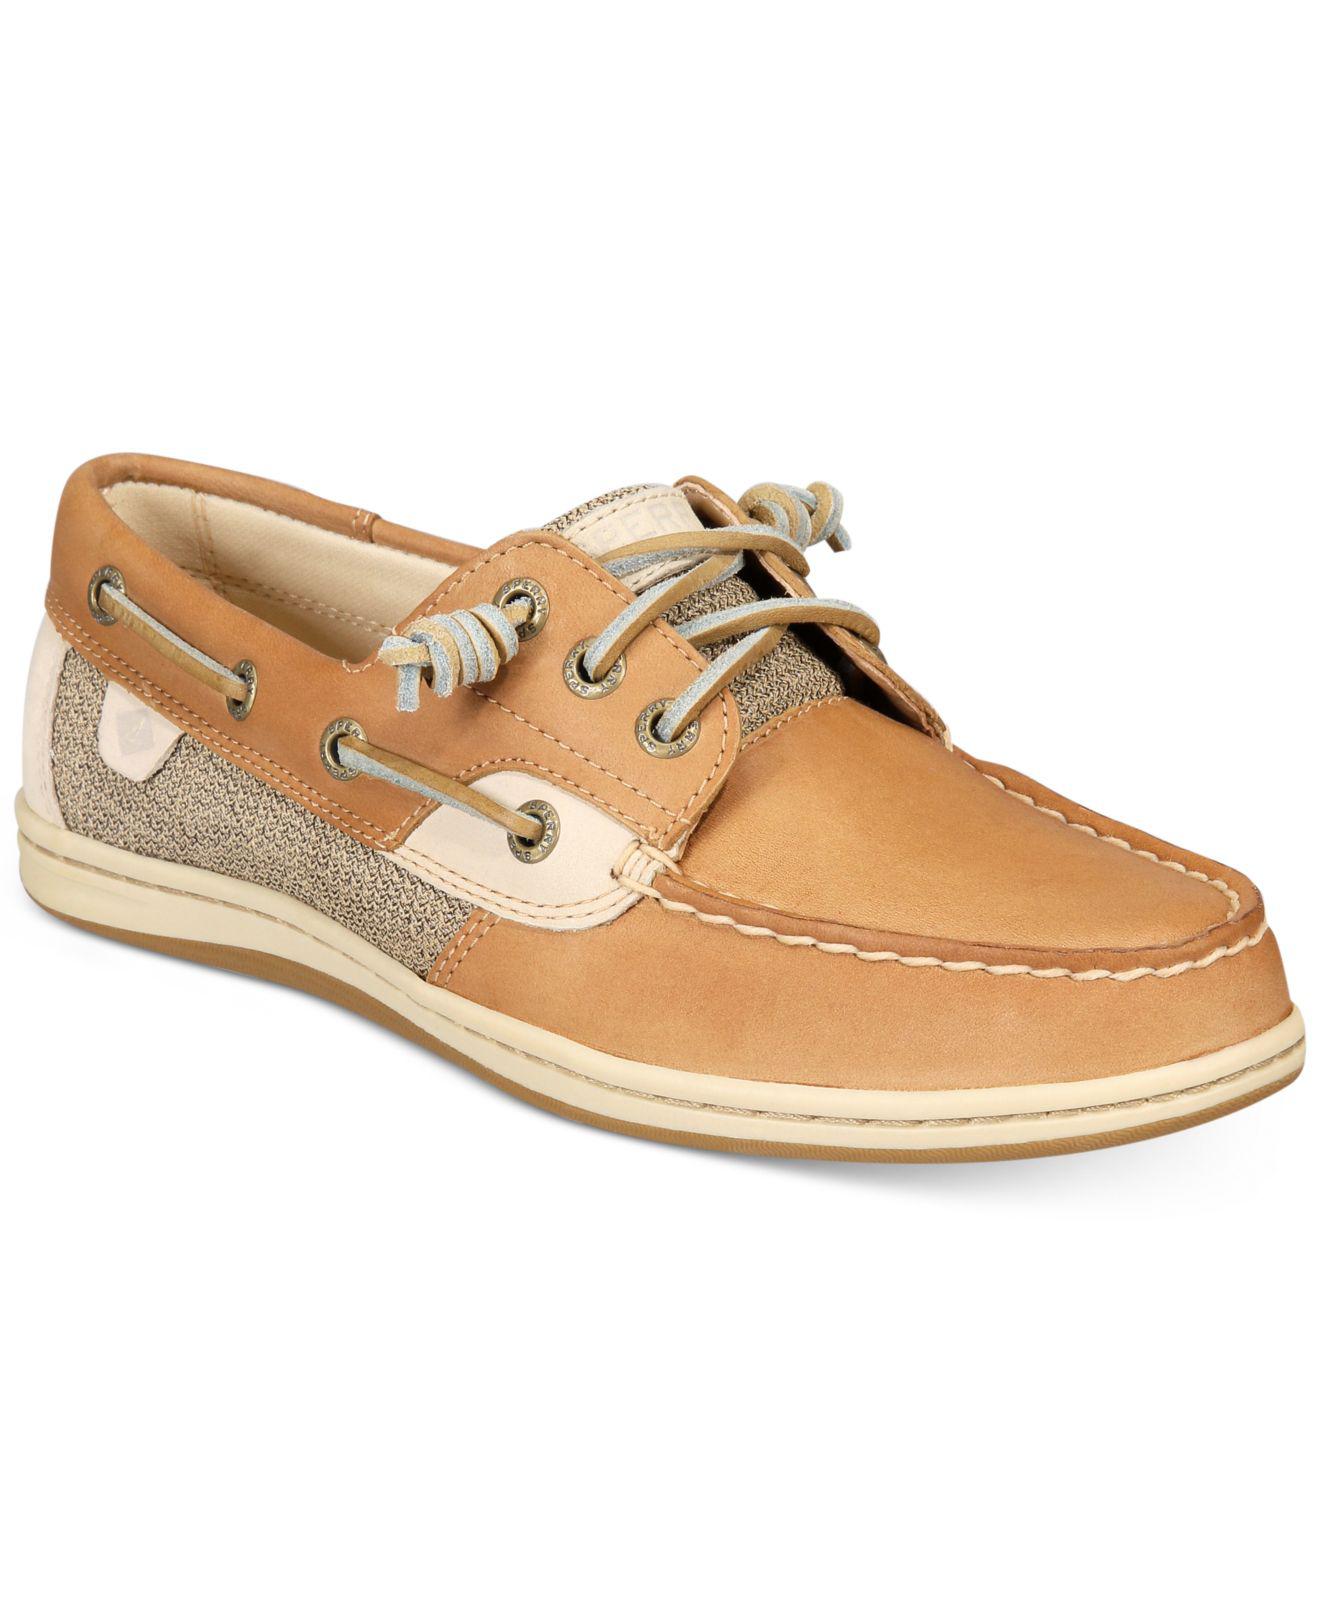 Sperry Top-Sider Leather Women's Song Fish Boat Shoes in Natural - Lyst